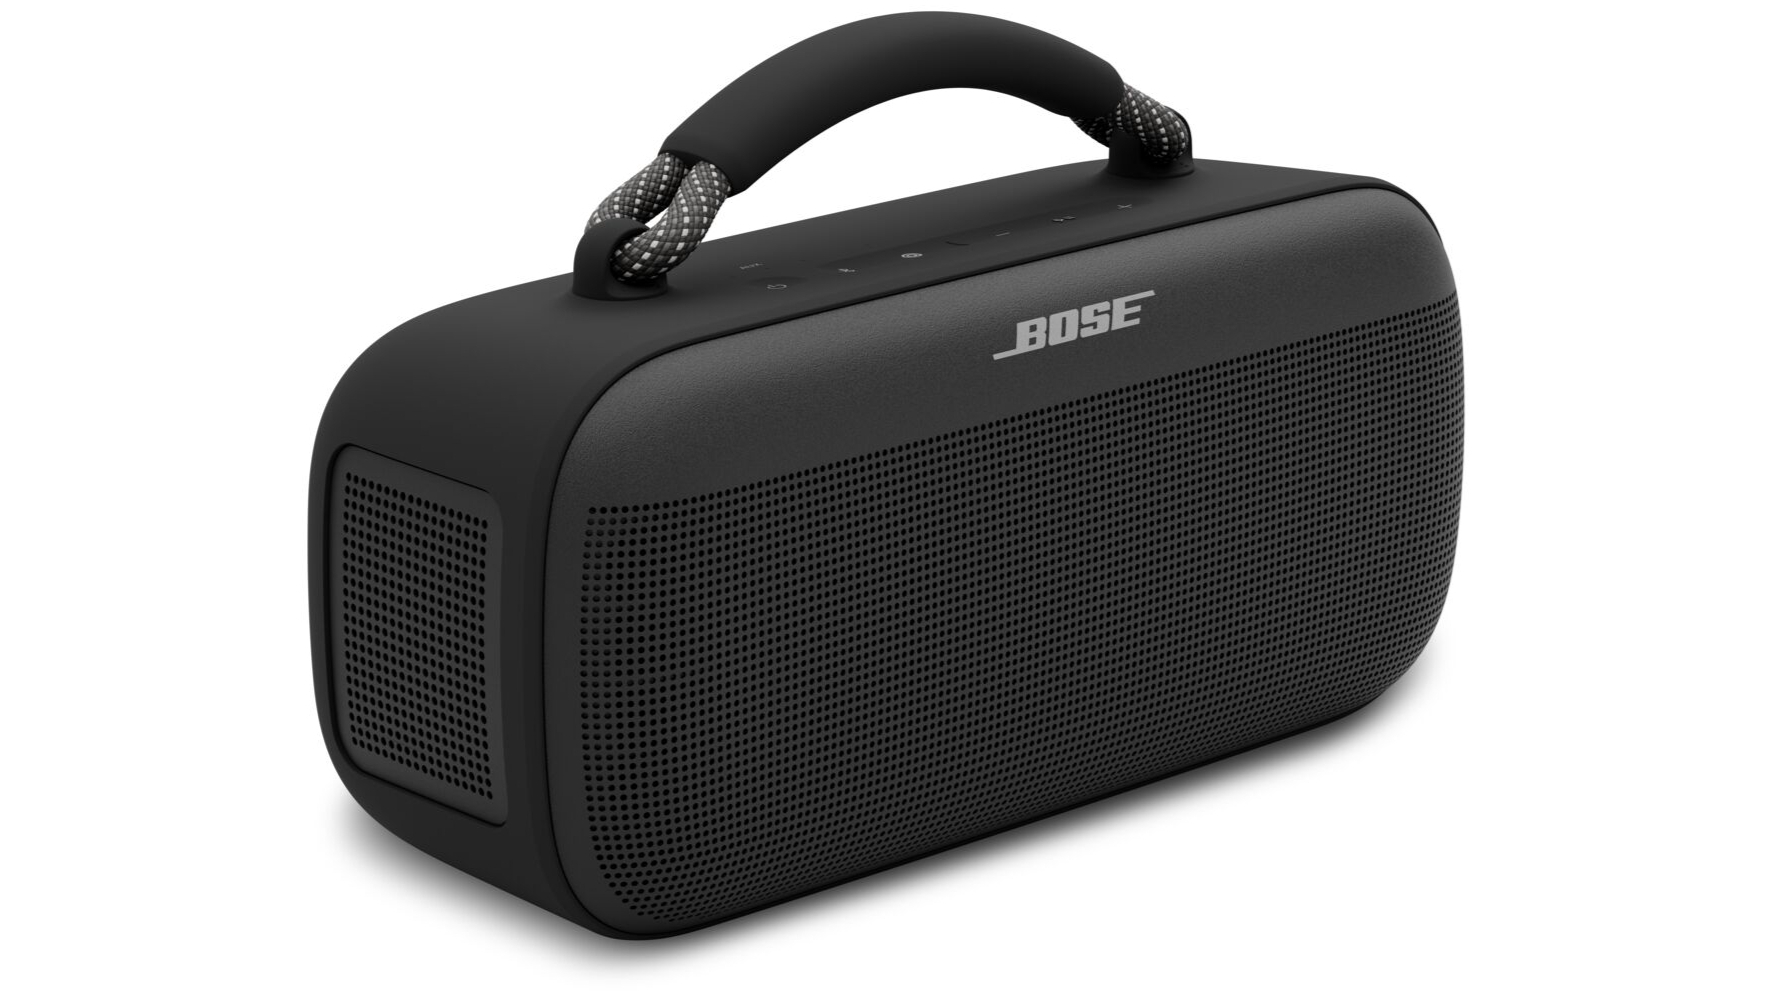 Bose’s latest Bluetooth speaker is a ruggedised rival to the Sonos Move 2